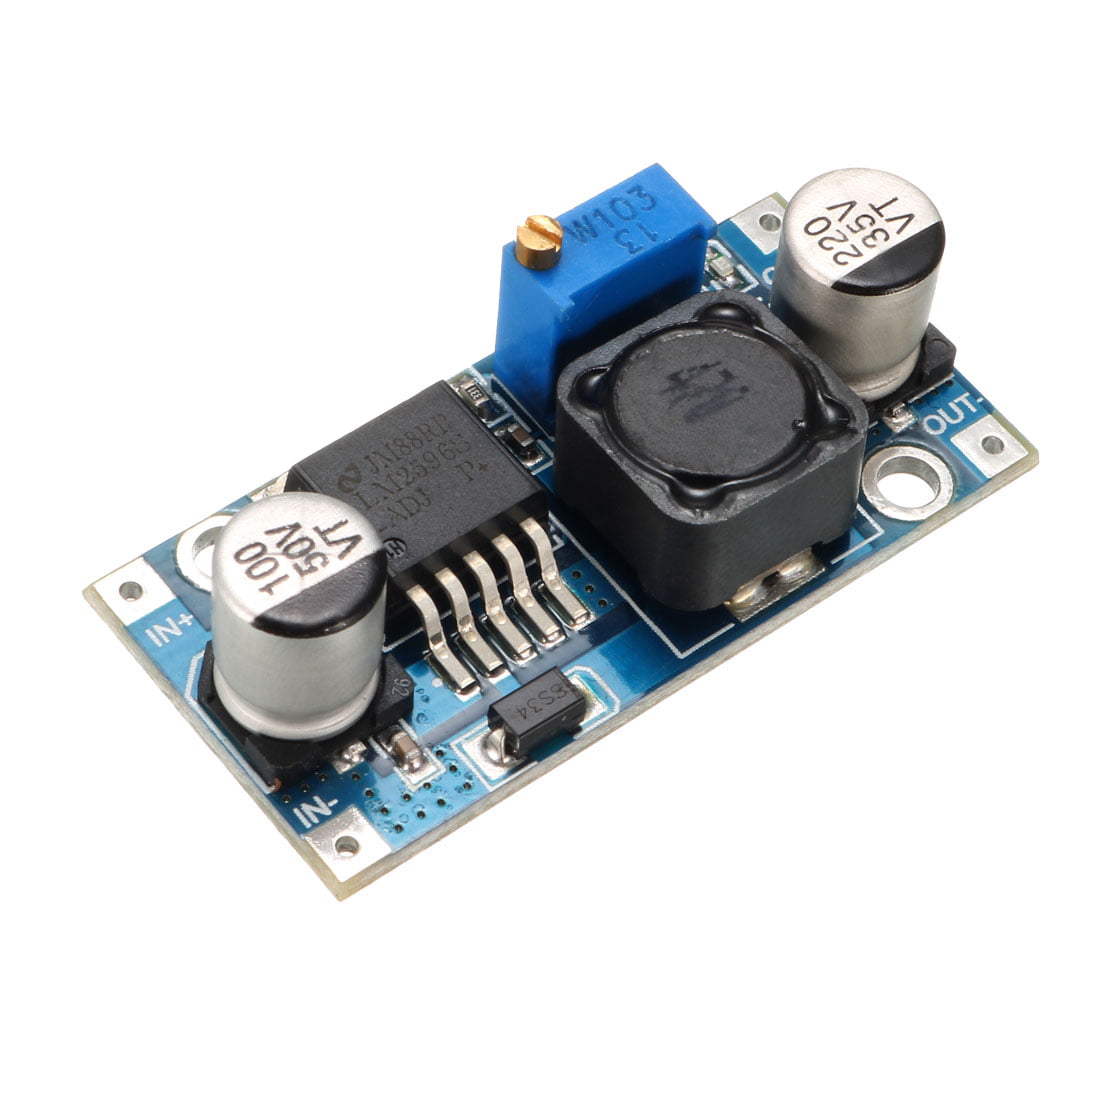 6 Pack LM2596 DC to DC Buck Converter 3.0-40V to 1.5-35V Power Supply Modul X5S7 